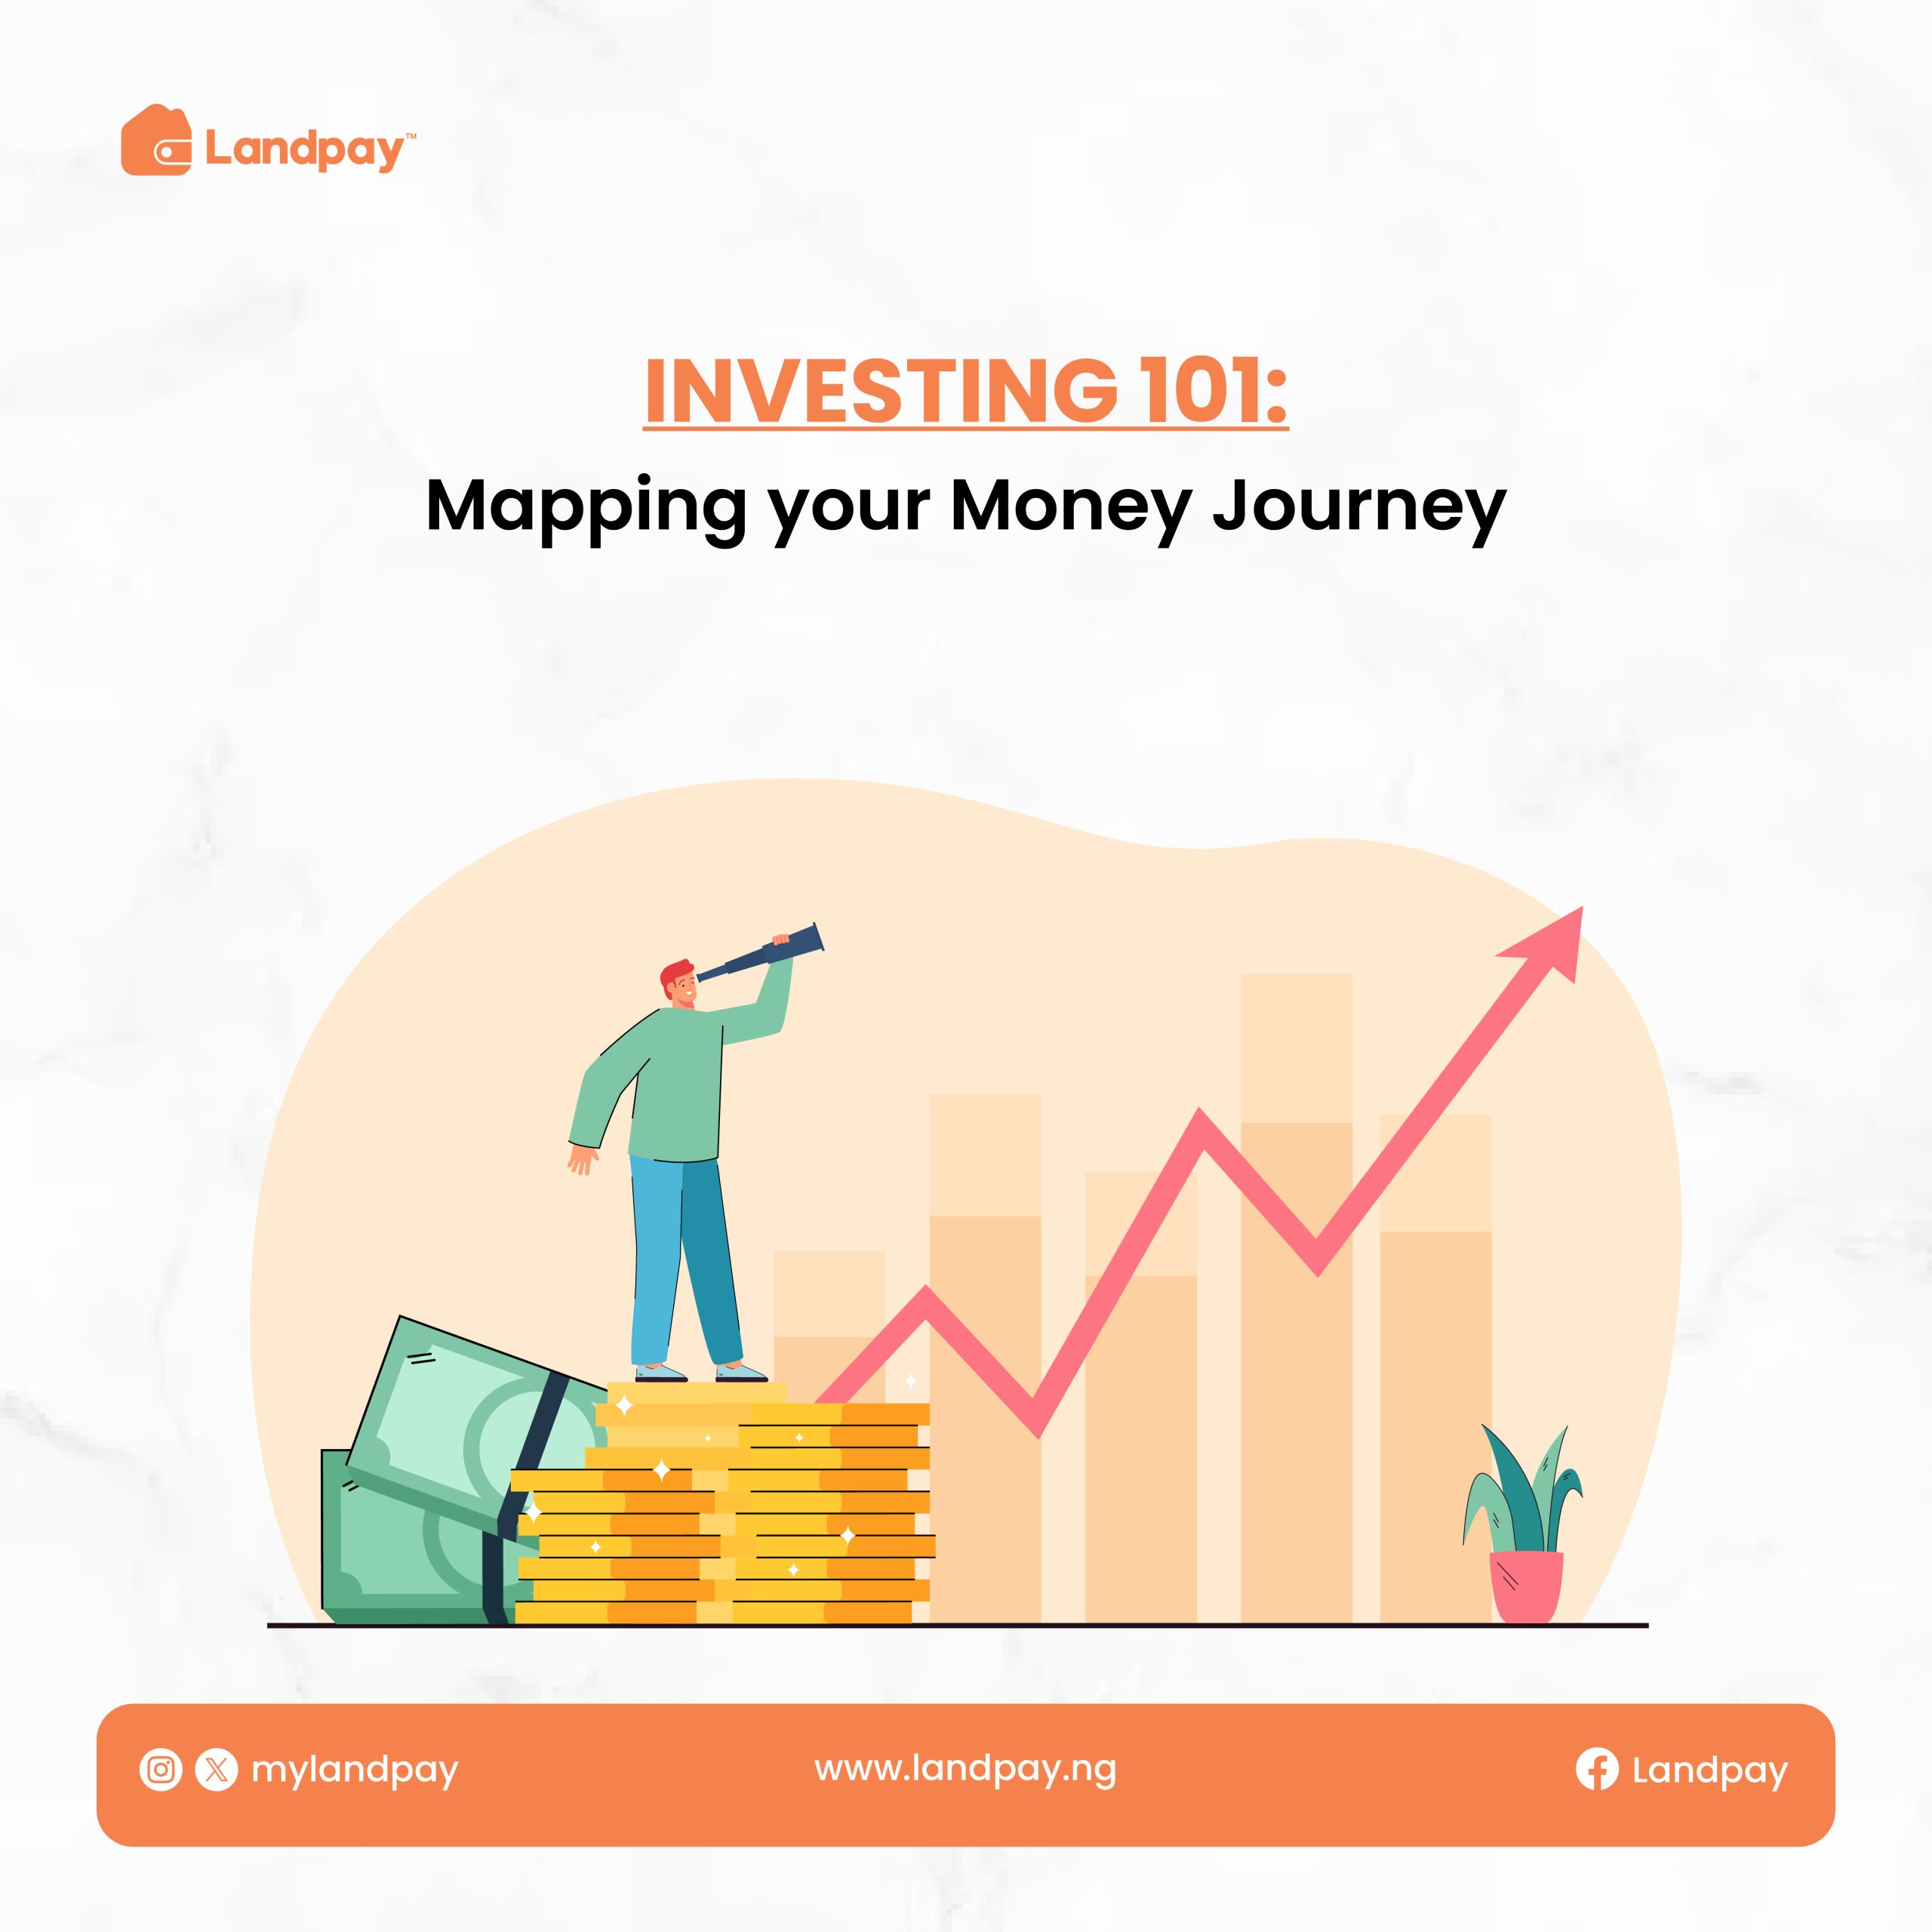 INVESTING 101: MAPPING YOUR MONEY JOURNEY